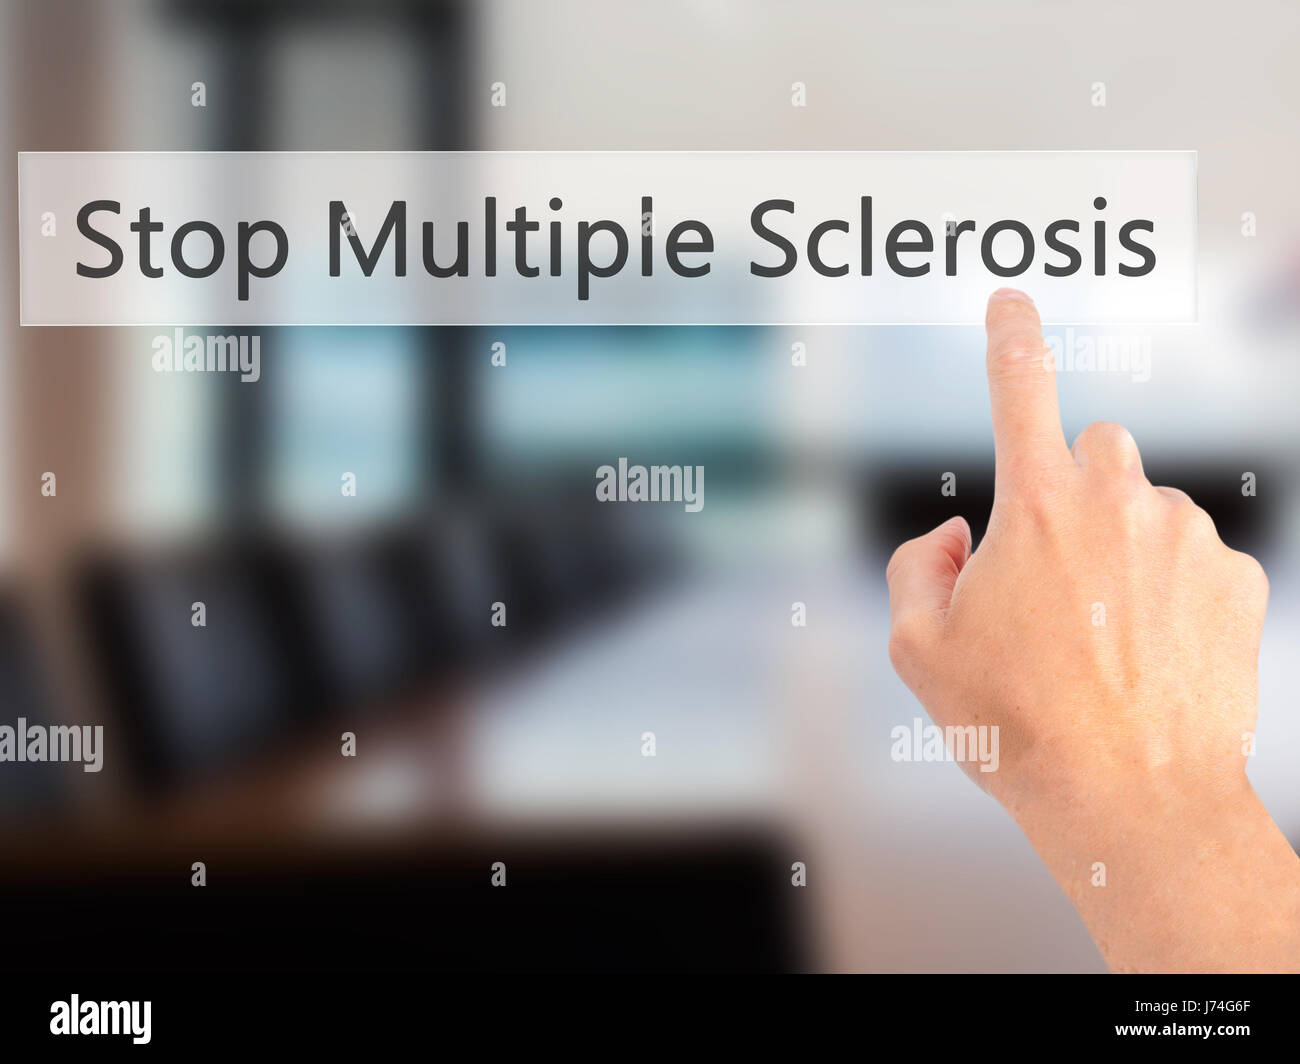 stop-multiple-sclerosis-hand-pressing-a-button-on-blurred-background-concept-business